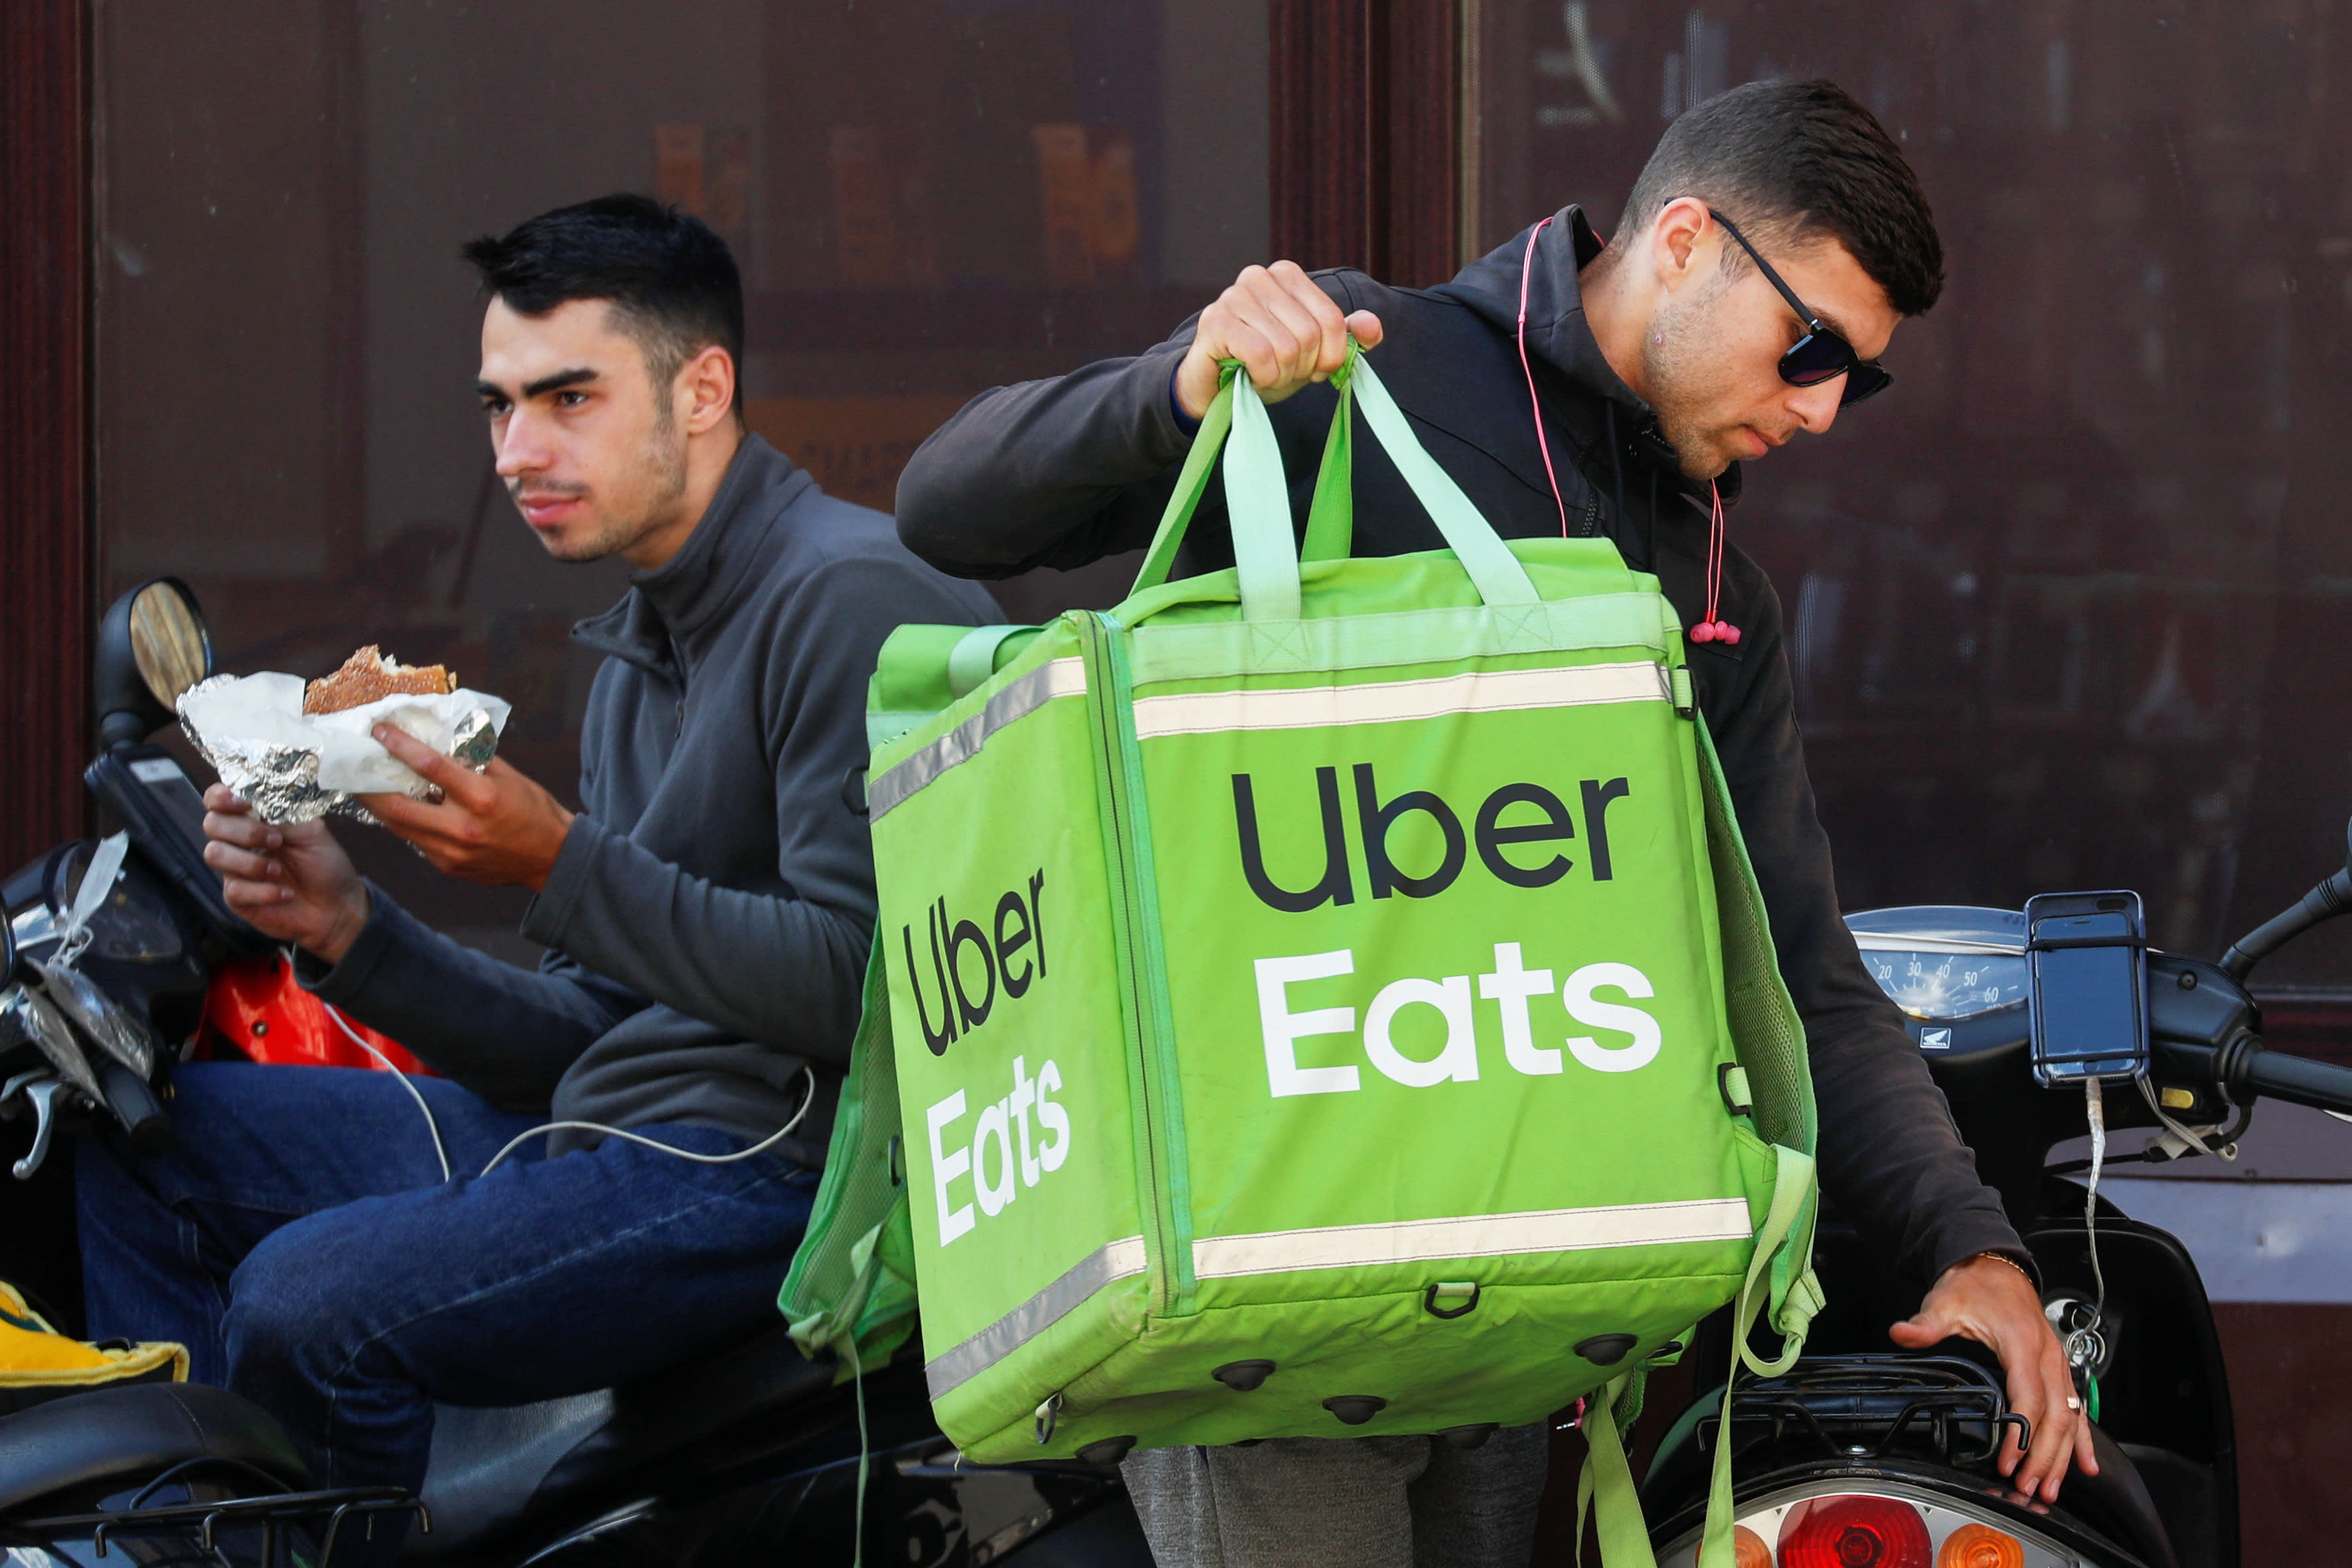 grubhub, uber eats and doordash drove an online food delivery boom